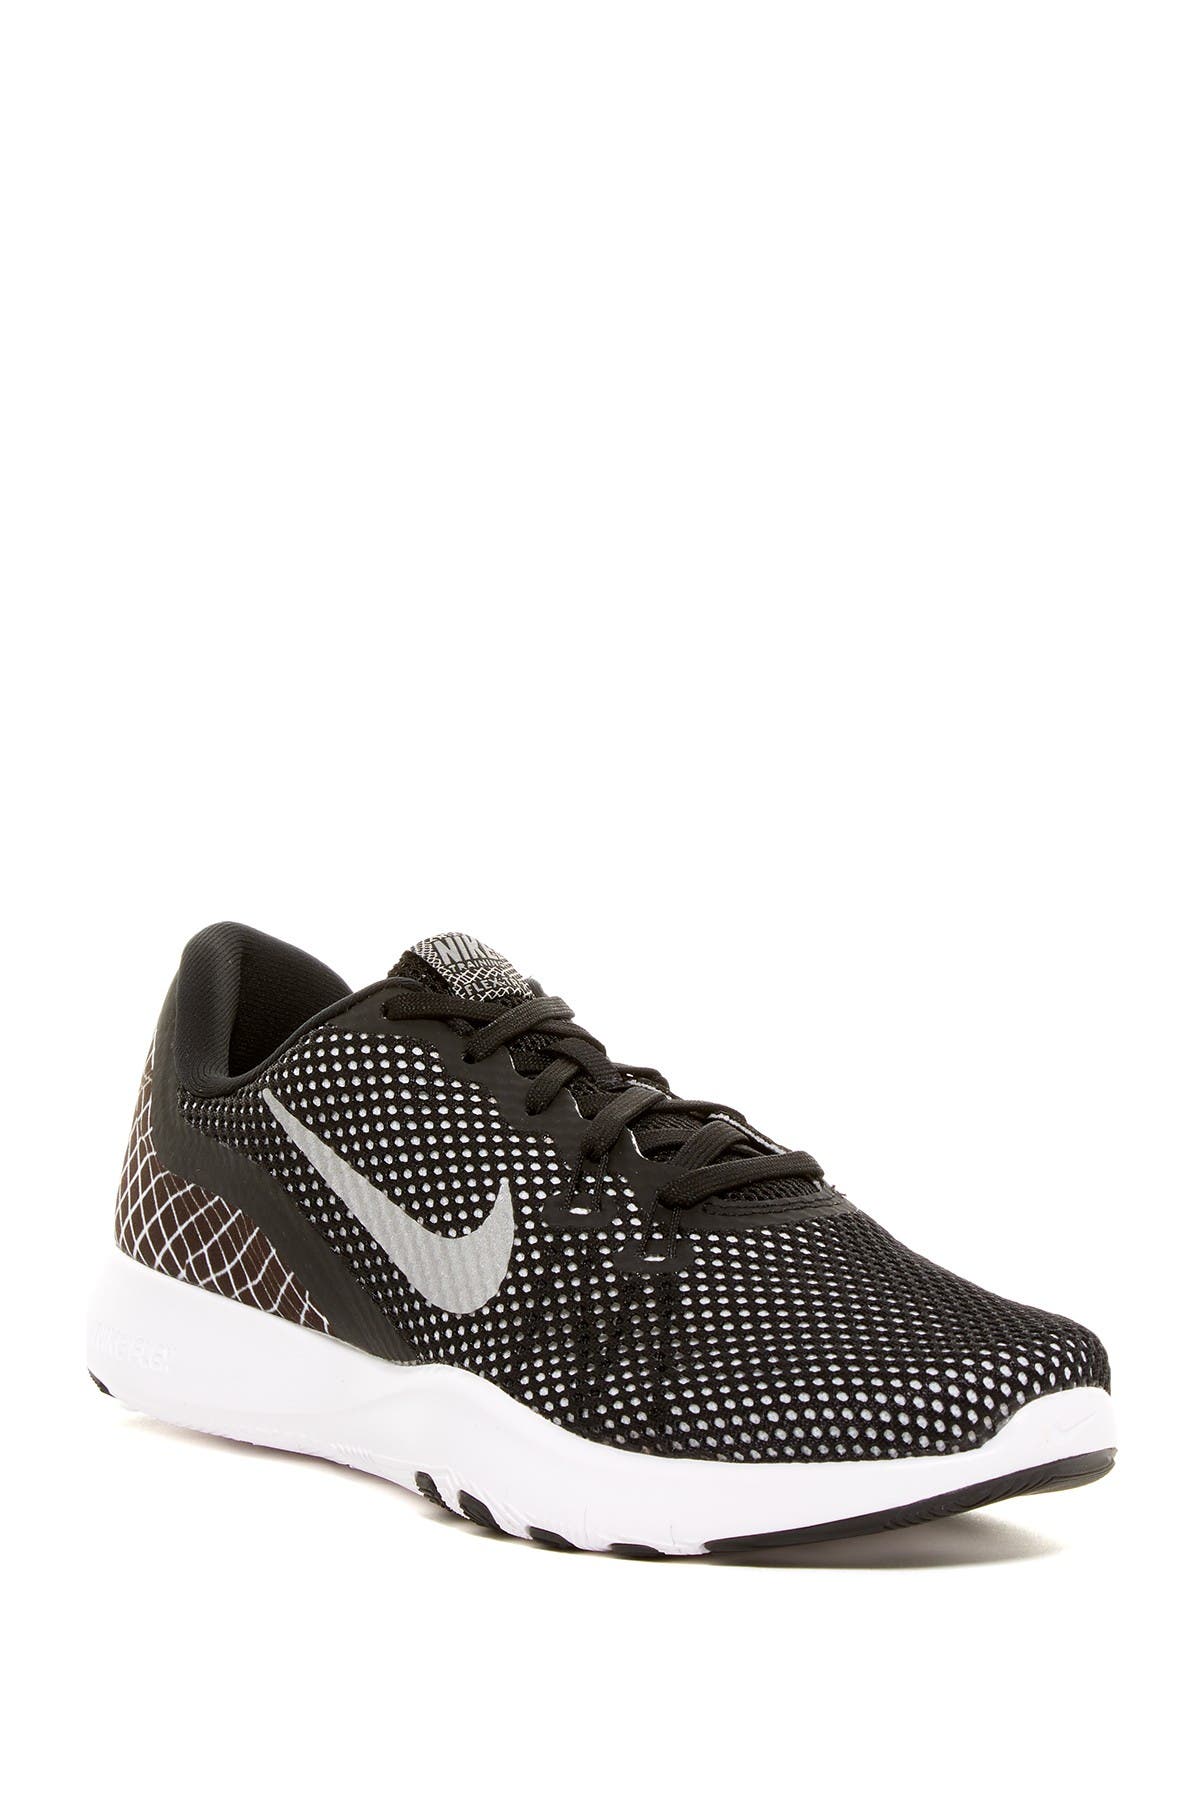 nordstrom rack athletic shoes